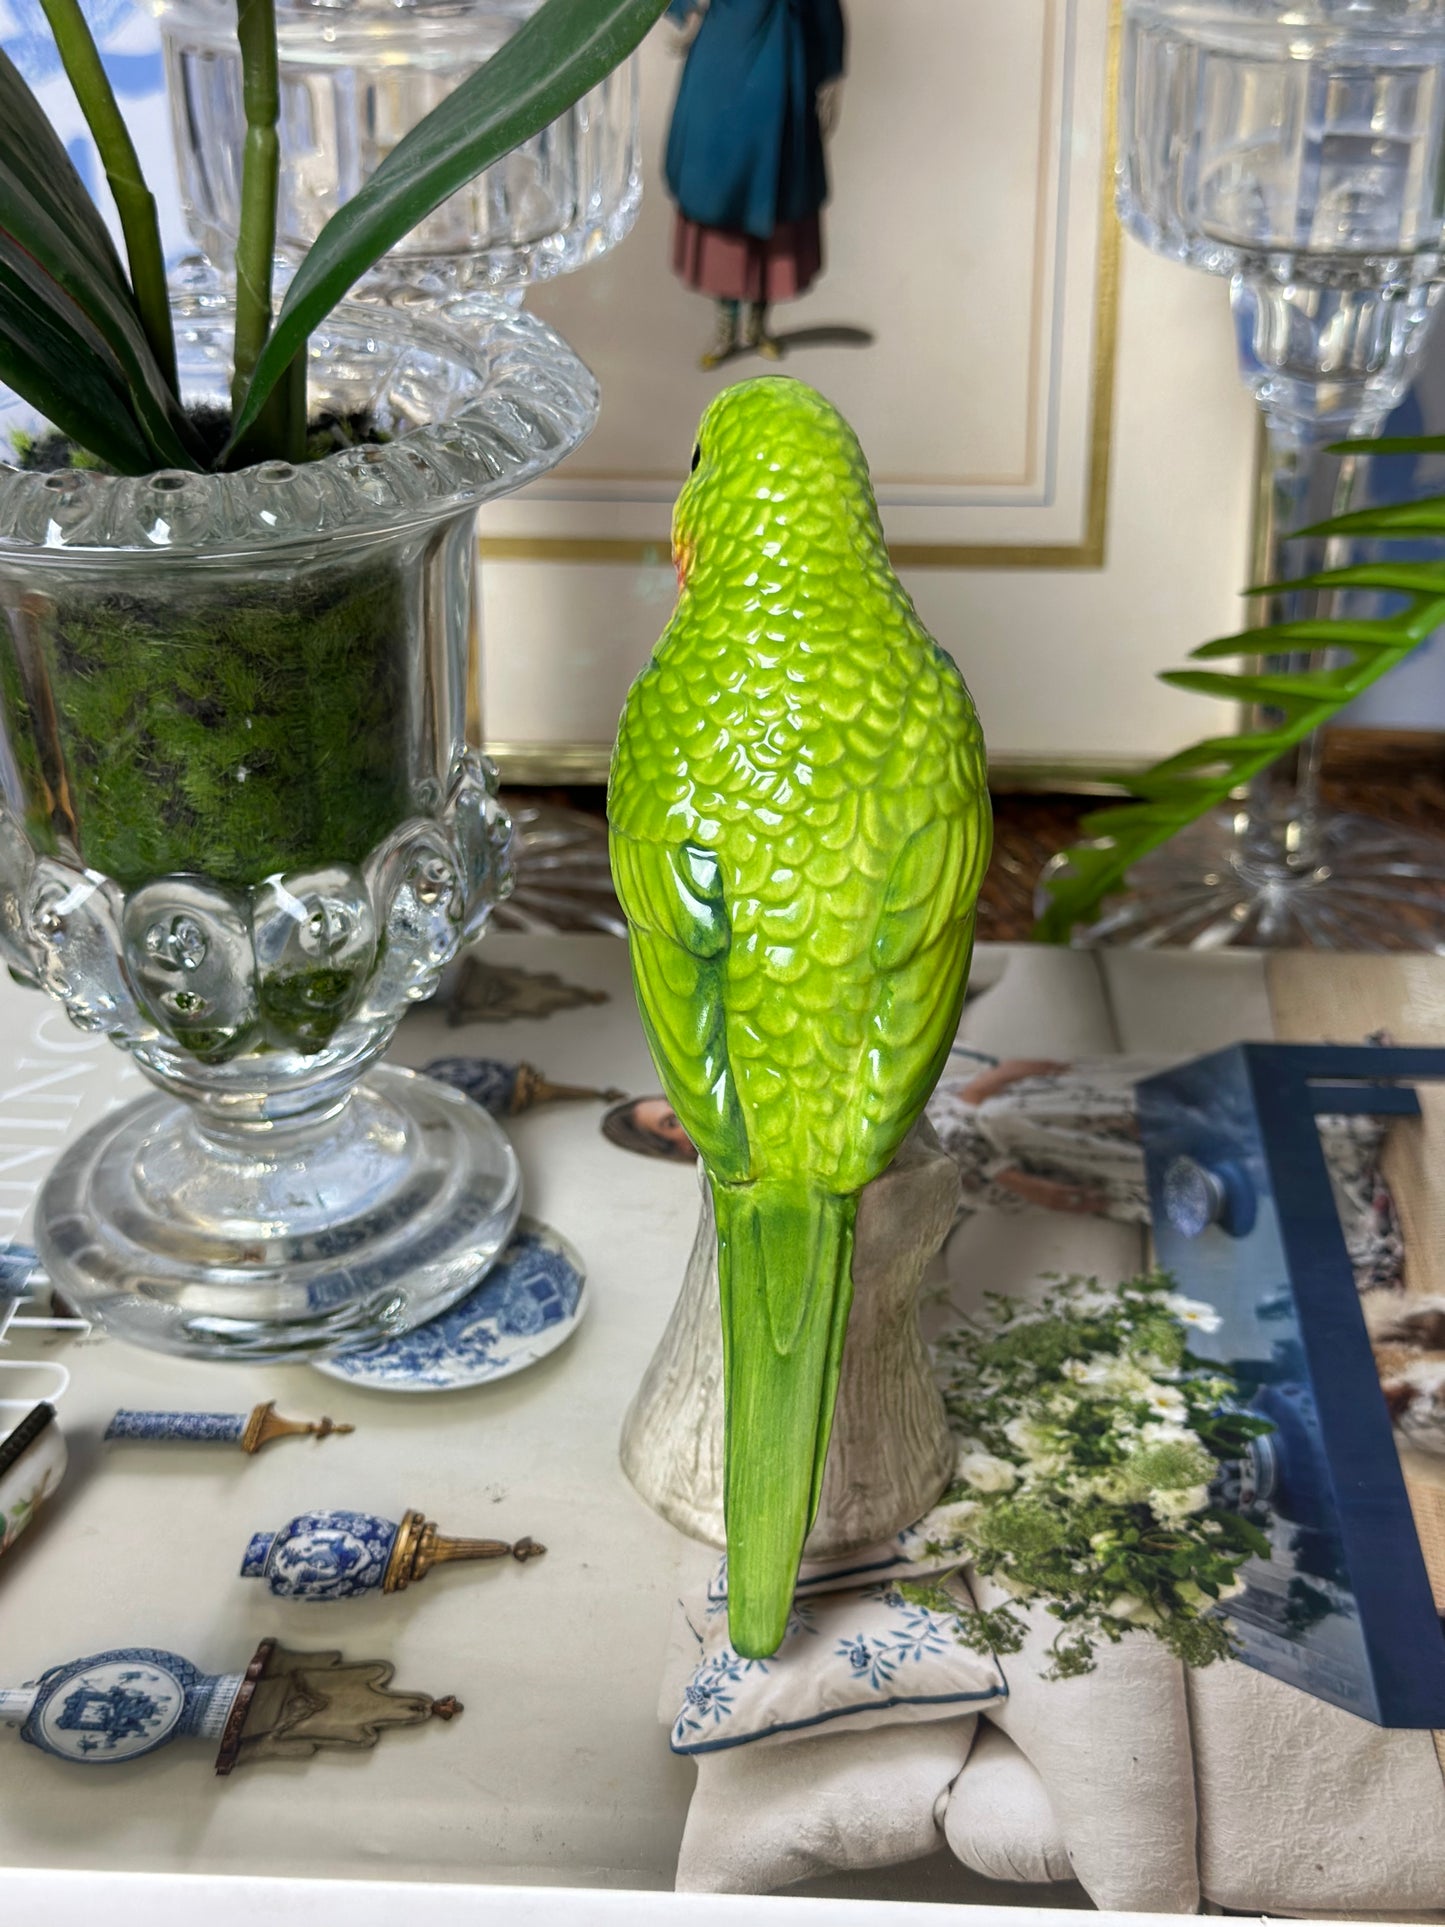 WCCR COLLECTION - Vintage, Made in Italy Ceramic Parrot Figure, 6" Tall - Pristine!